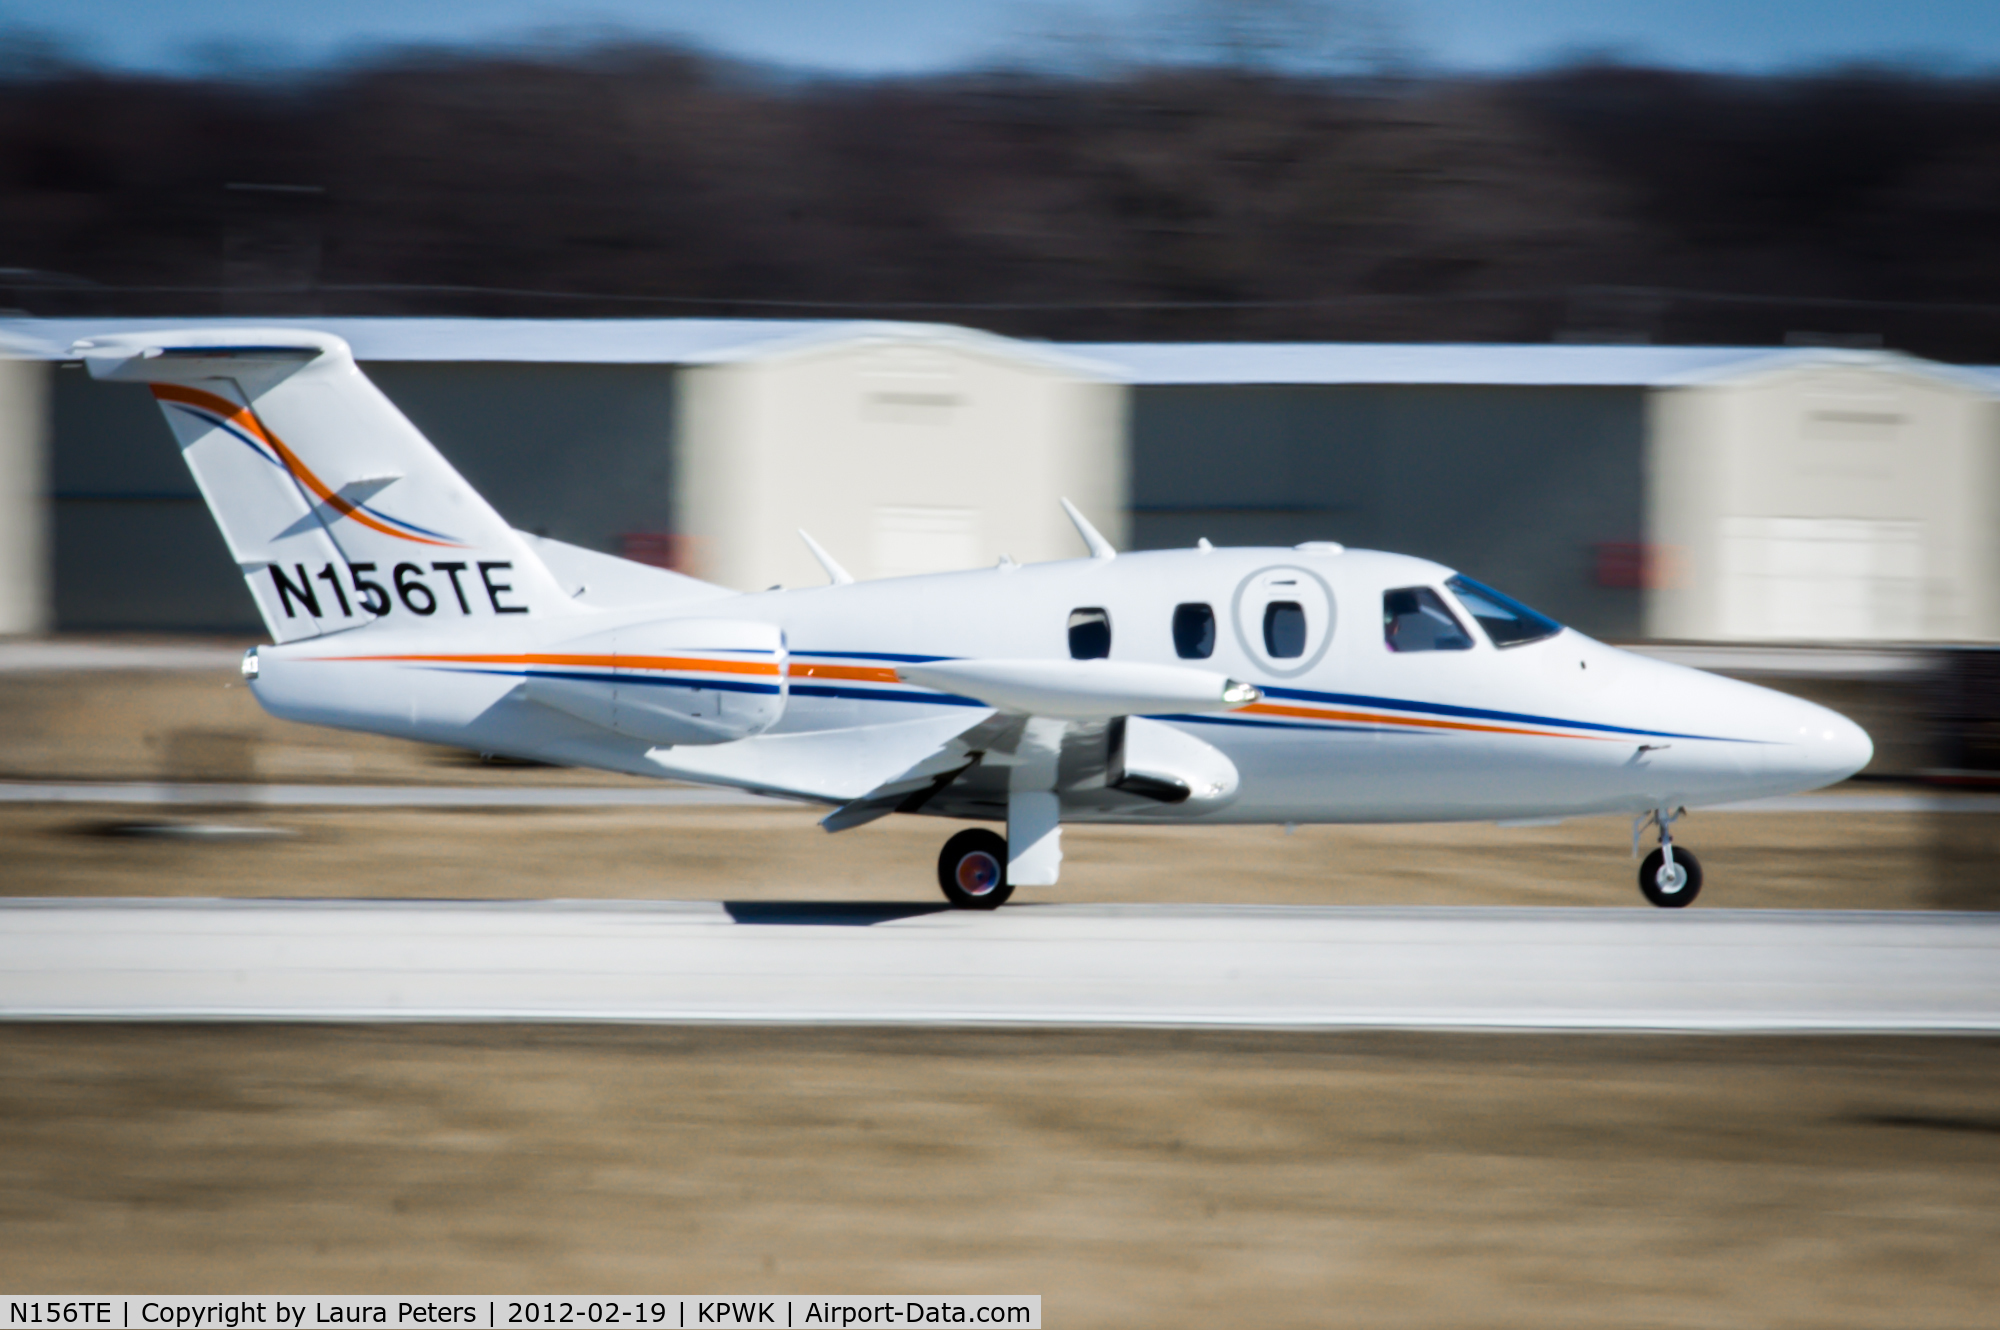 N156TE, 2007 Eclipse Aviation Corp EA500 C/N 000056, Chicago Executive Airport